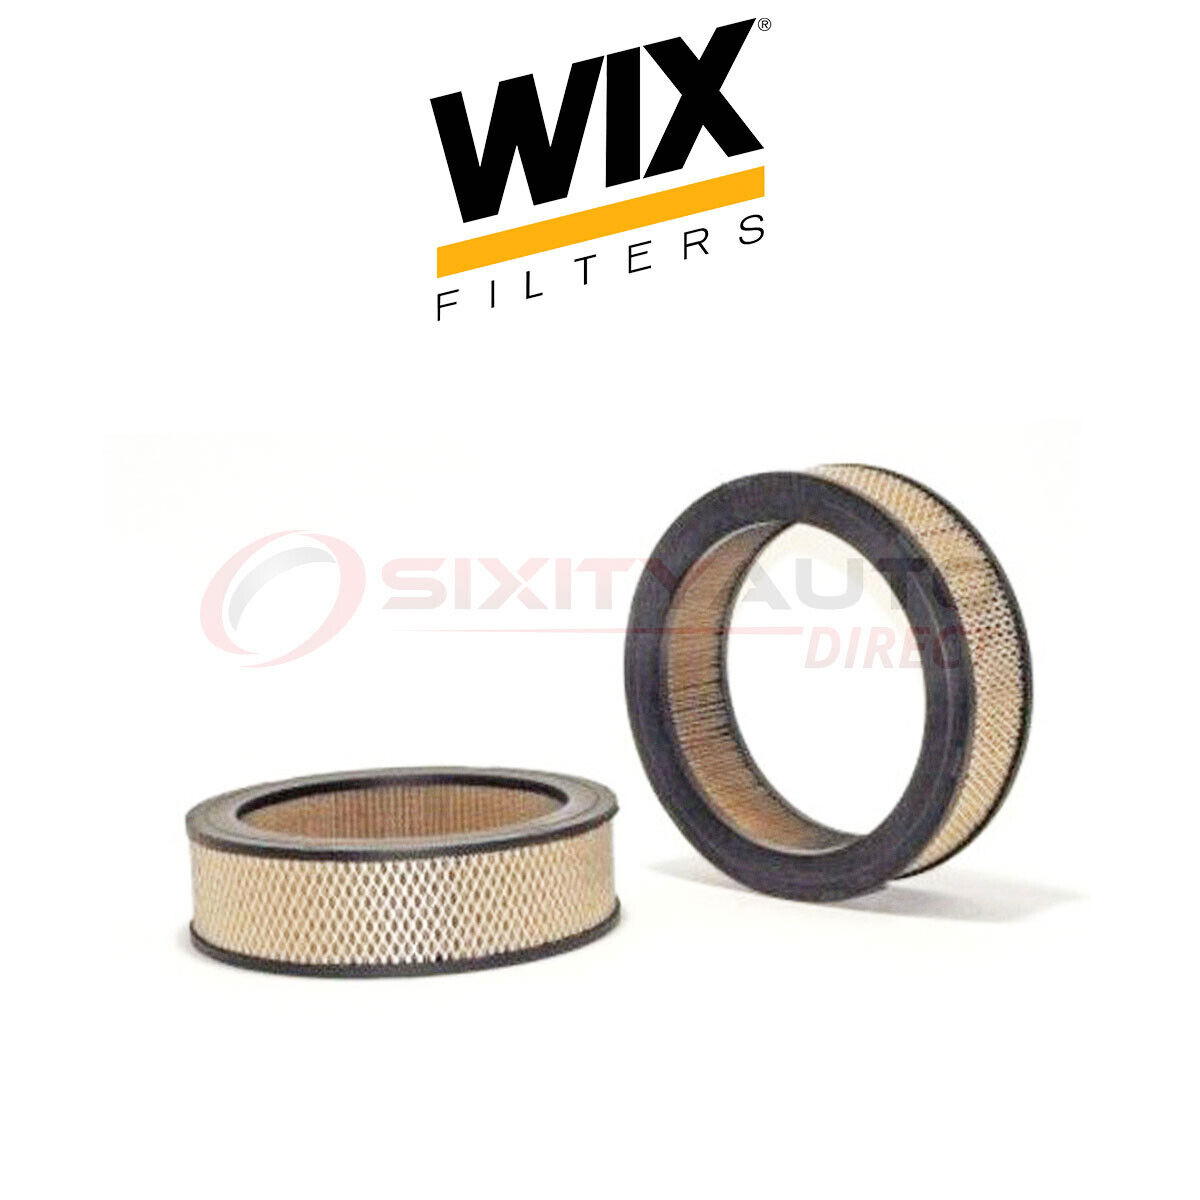 WIX Air Filter for 1972-1978 Mazda RX-3 1.1L R2 - Filtration System ey